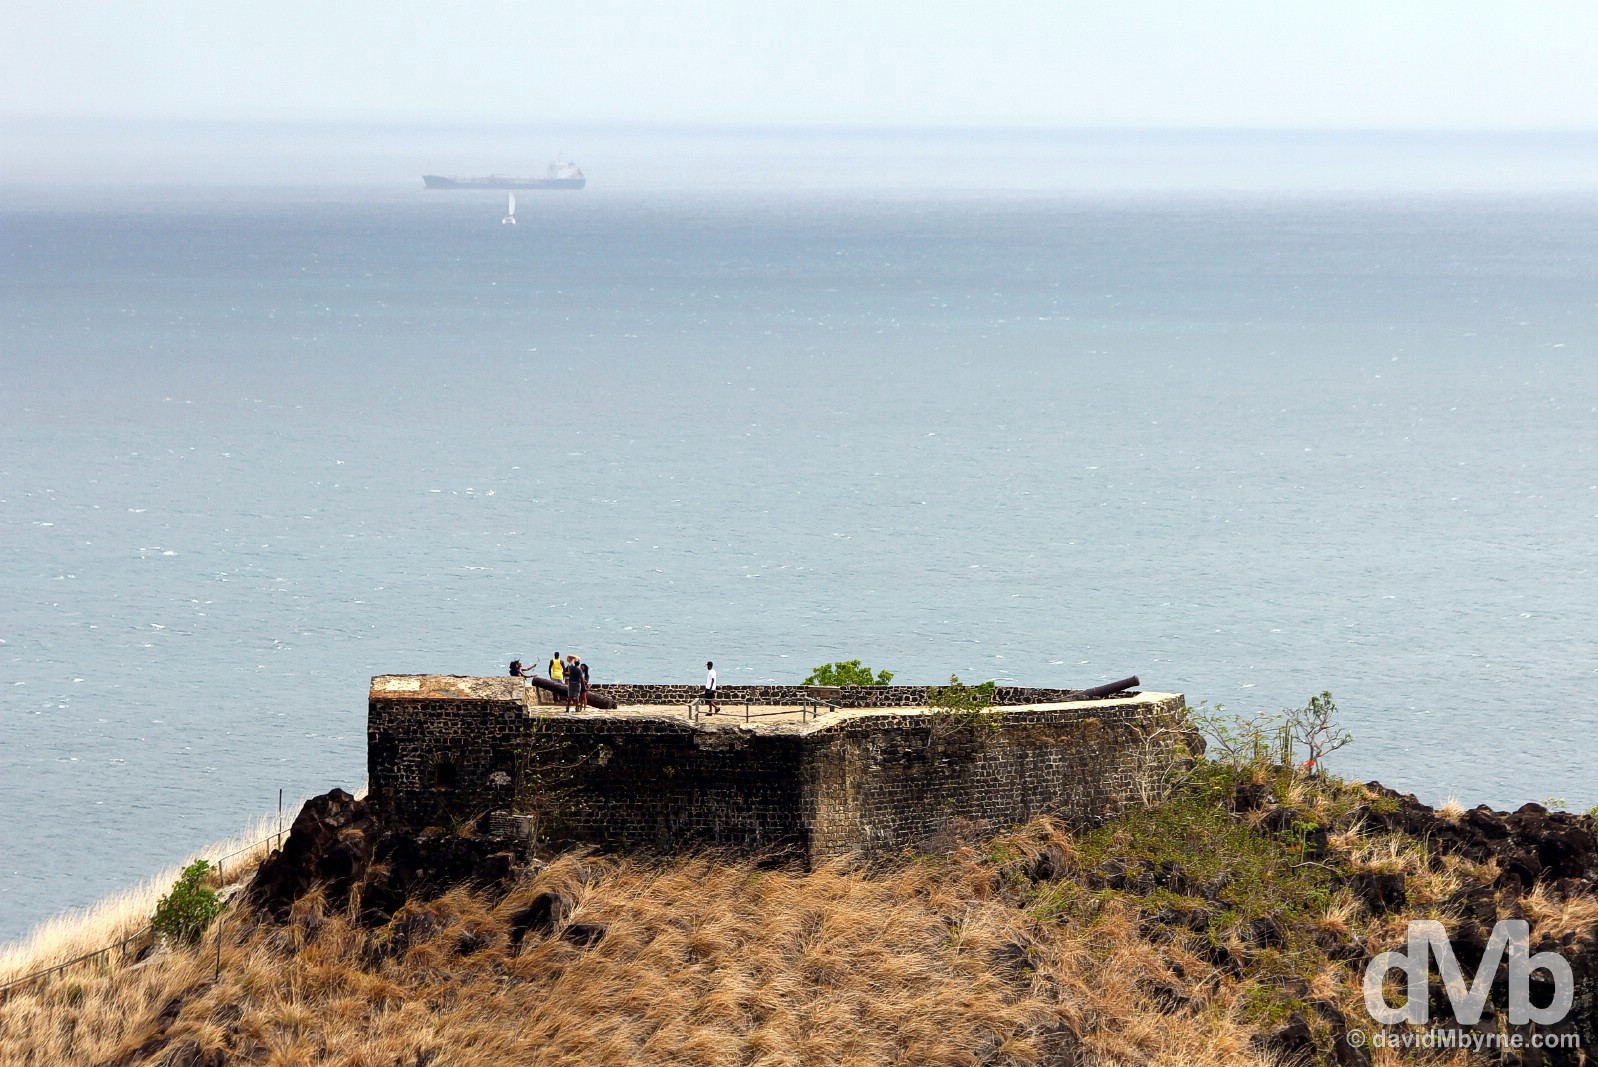 Fort Rodney & far-off shipping as seen from Signal Peak on Pigeon Island, St. Lucia, Lesser Antilles. June 16, 2015.